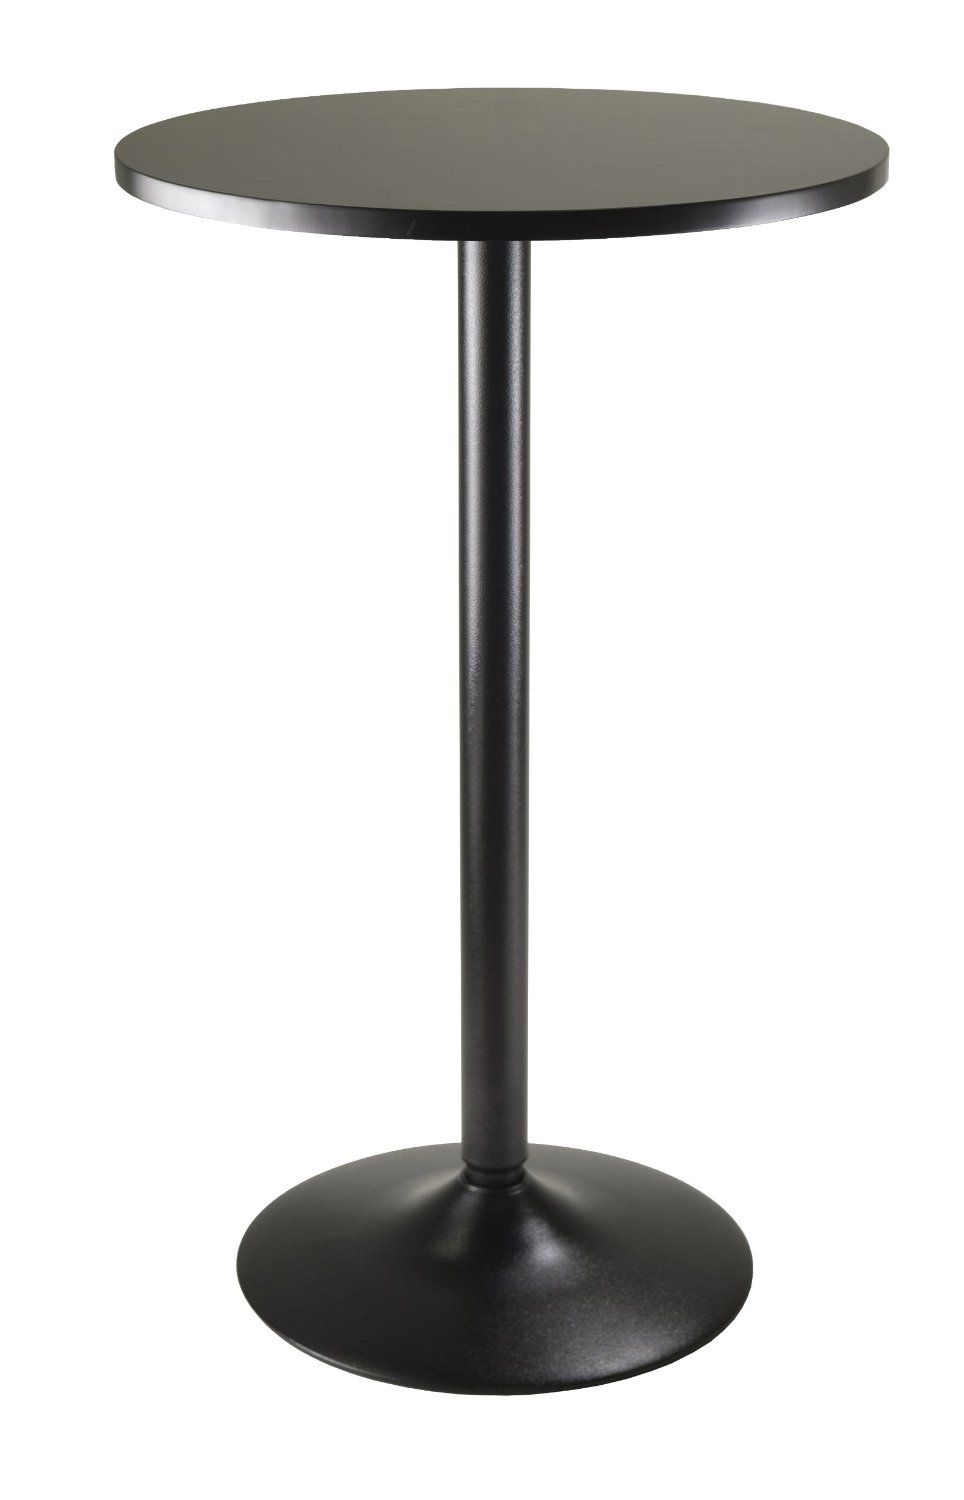 Winsome Obsidian Pub Table Round Black